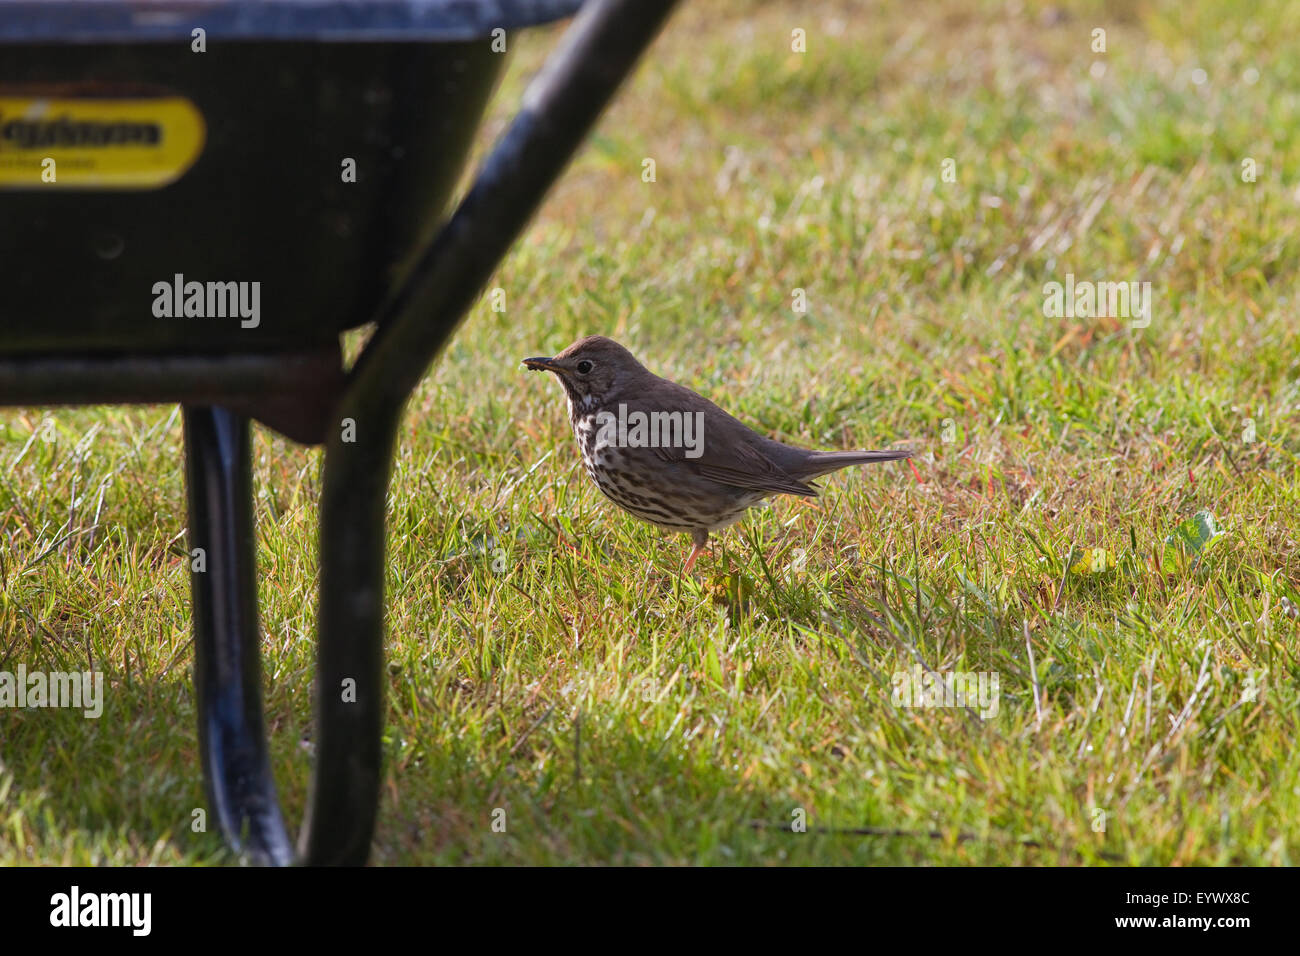 Song Thrush (Turdus philomelos). Searching for food items on a lawn alongside a garden wheelbarrow. May. Stock Photo